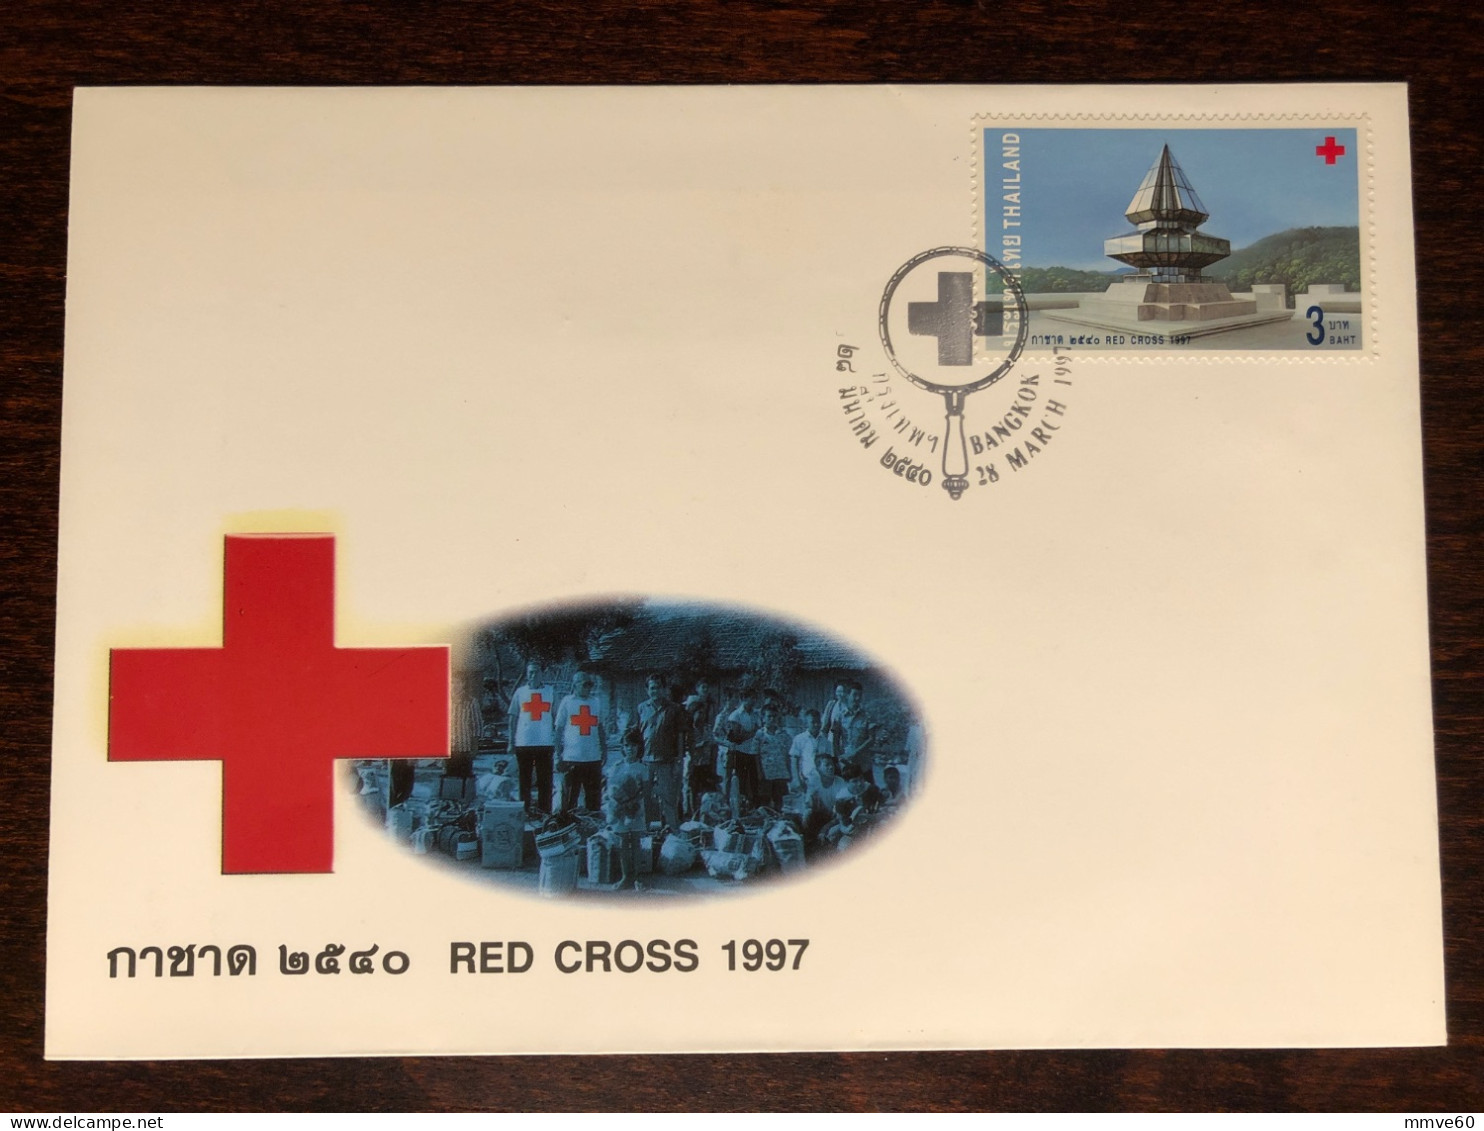 THAILAND FDC COVER 1997 YEAR RED CROSS HEALTH MEDICINE STAMPS - Thailand